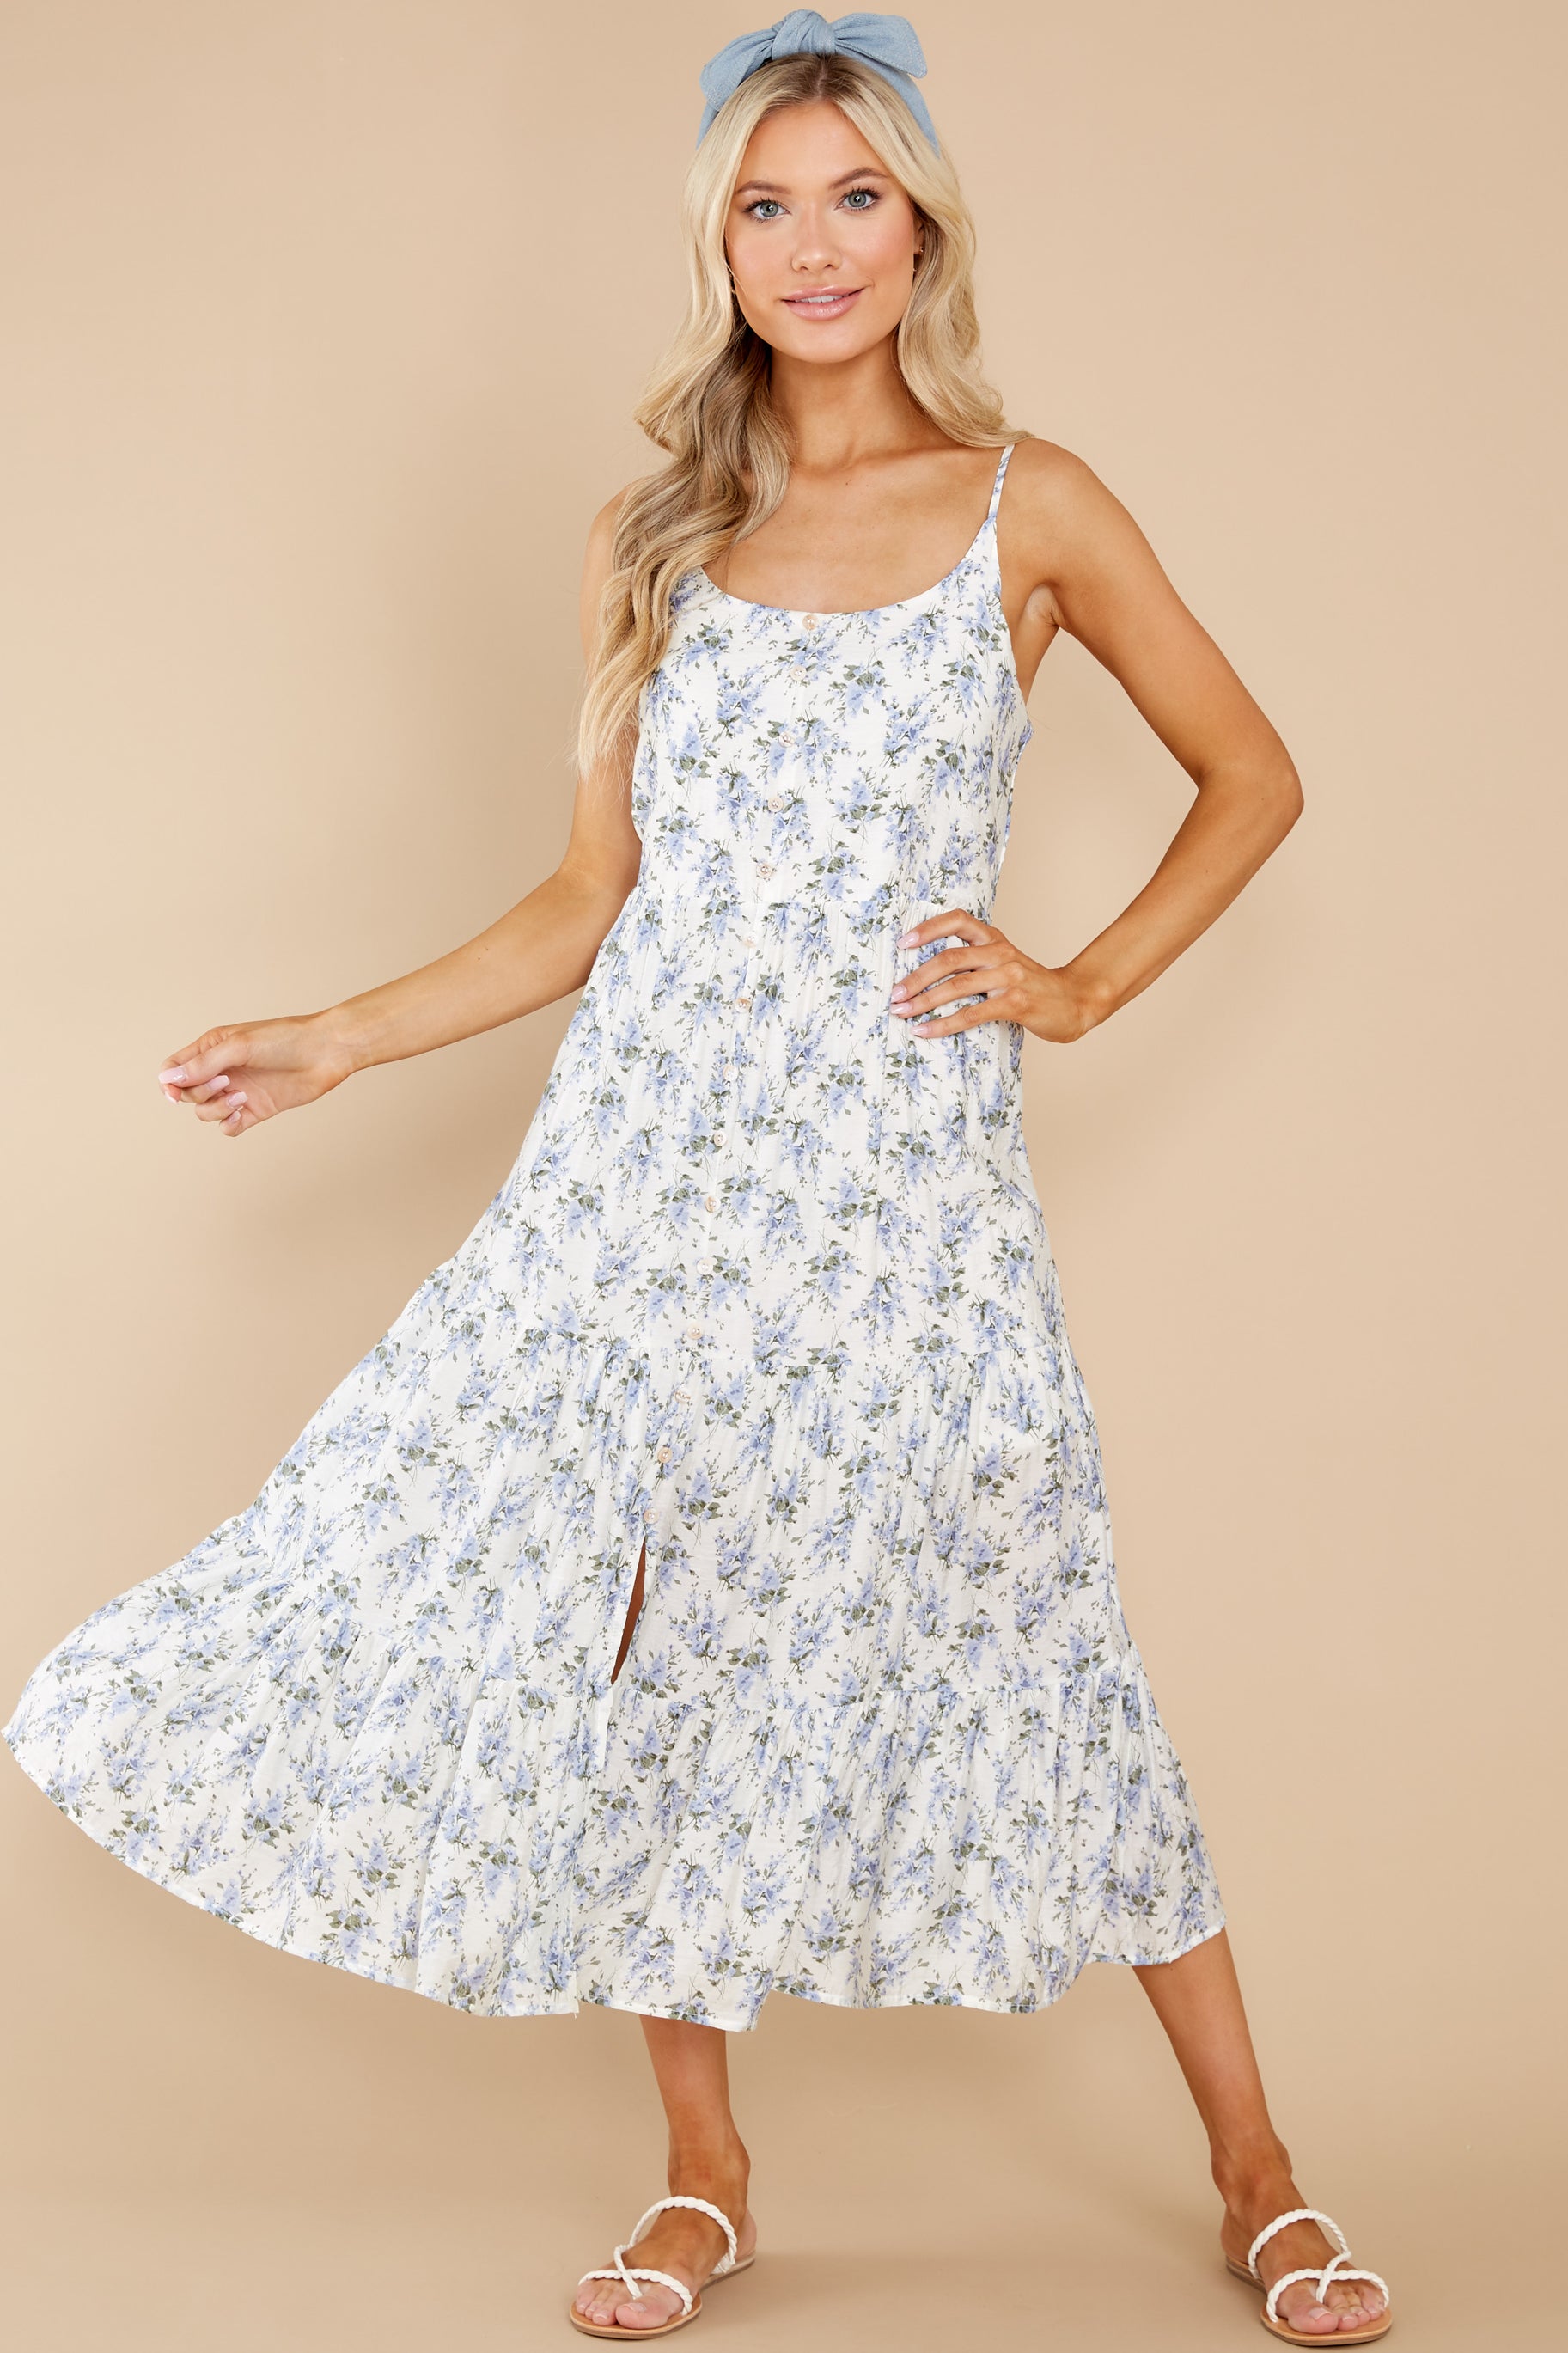 2 New Opportunity Blue And White Floral Print Midi Dress at reddress.com